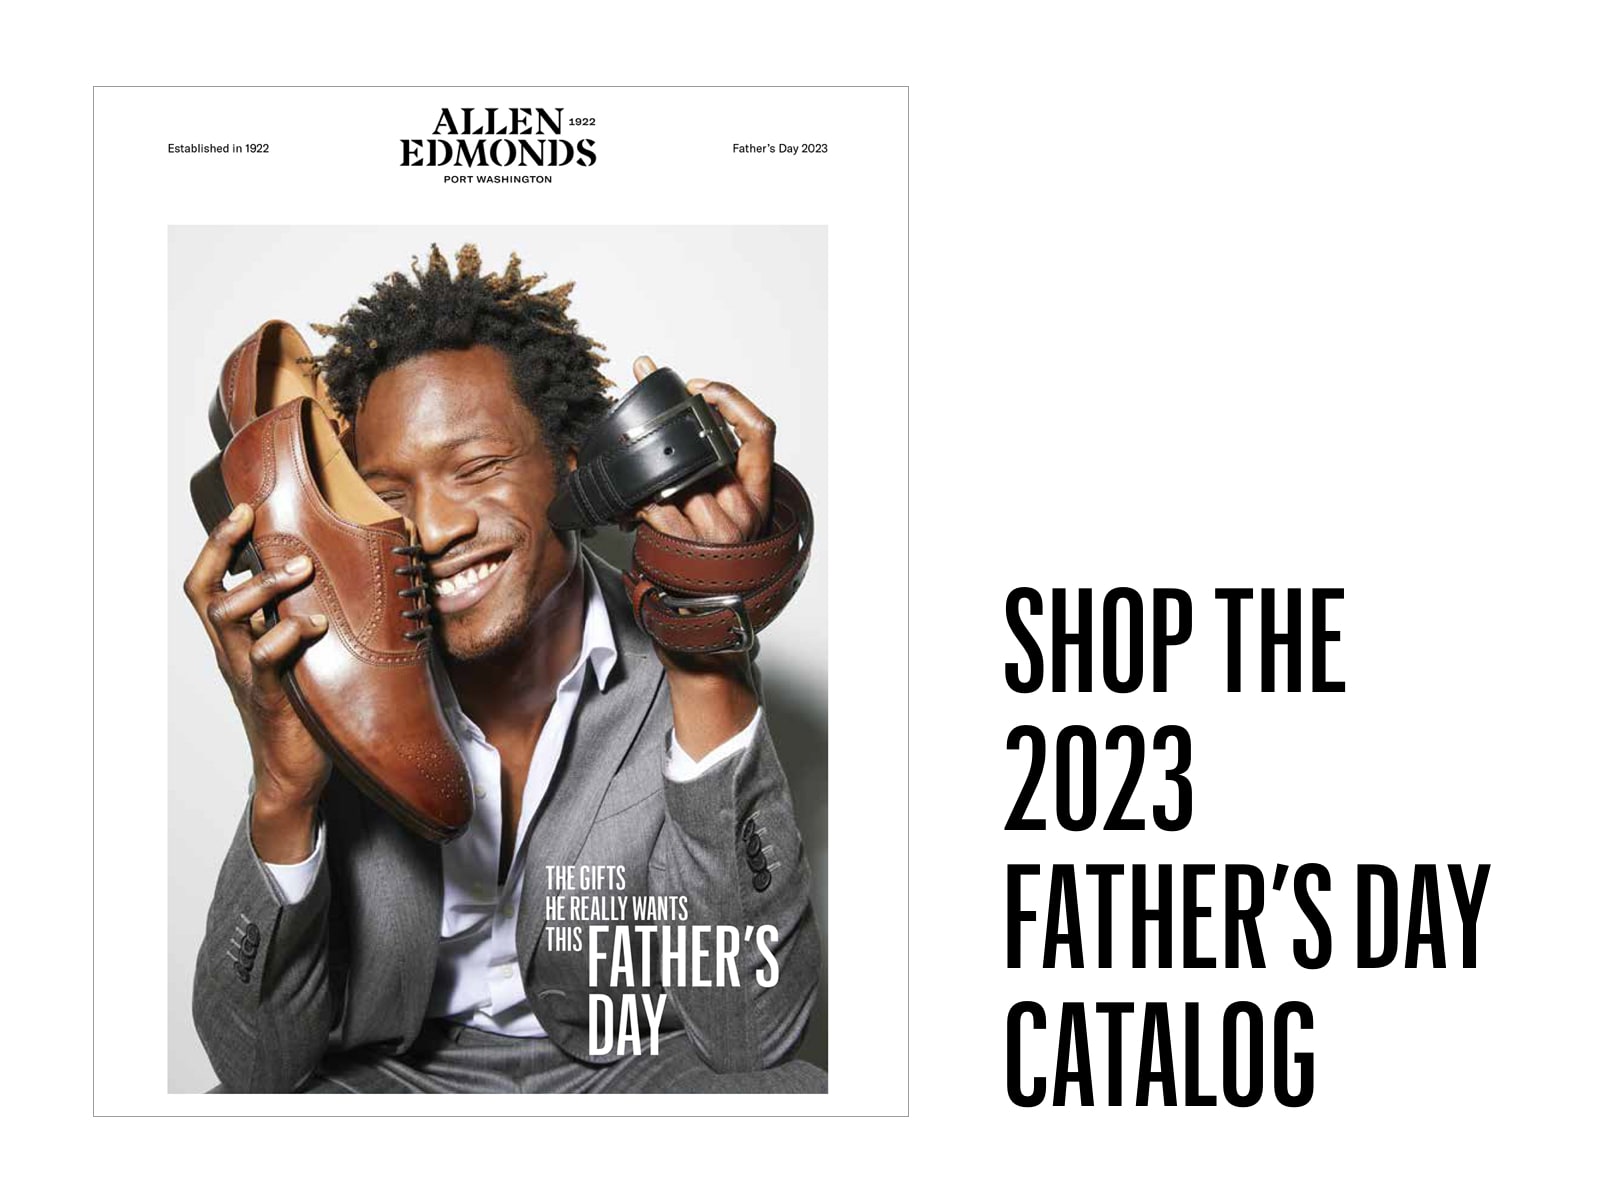 Shop the 2023 Father's Day Catalog